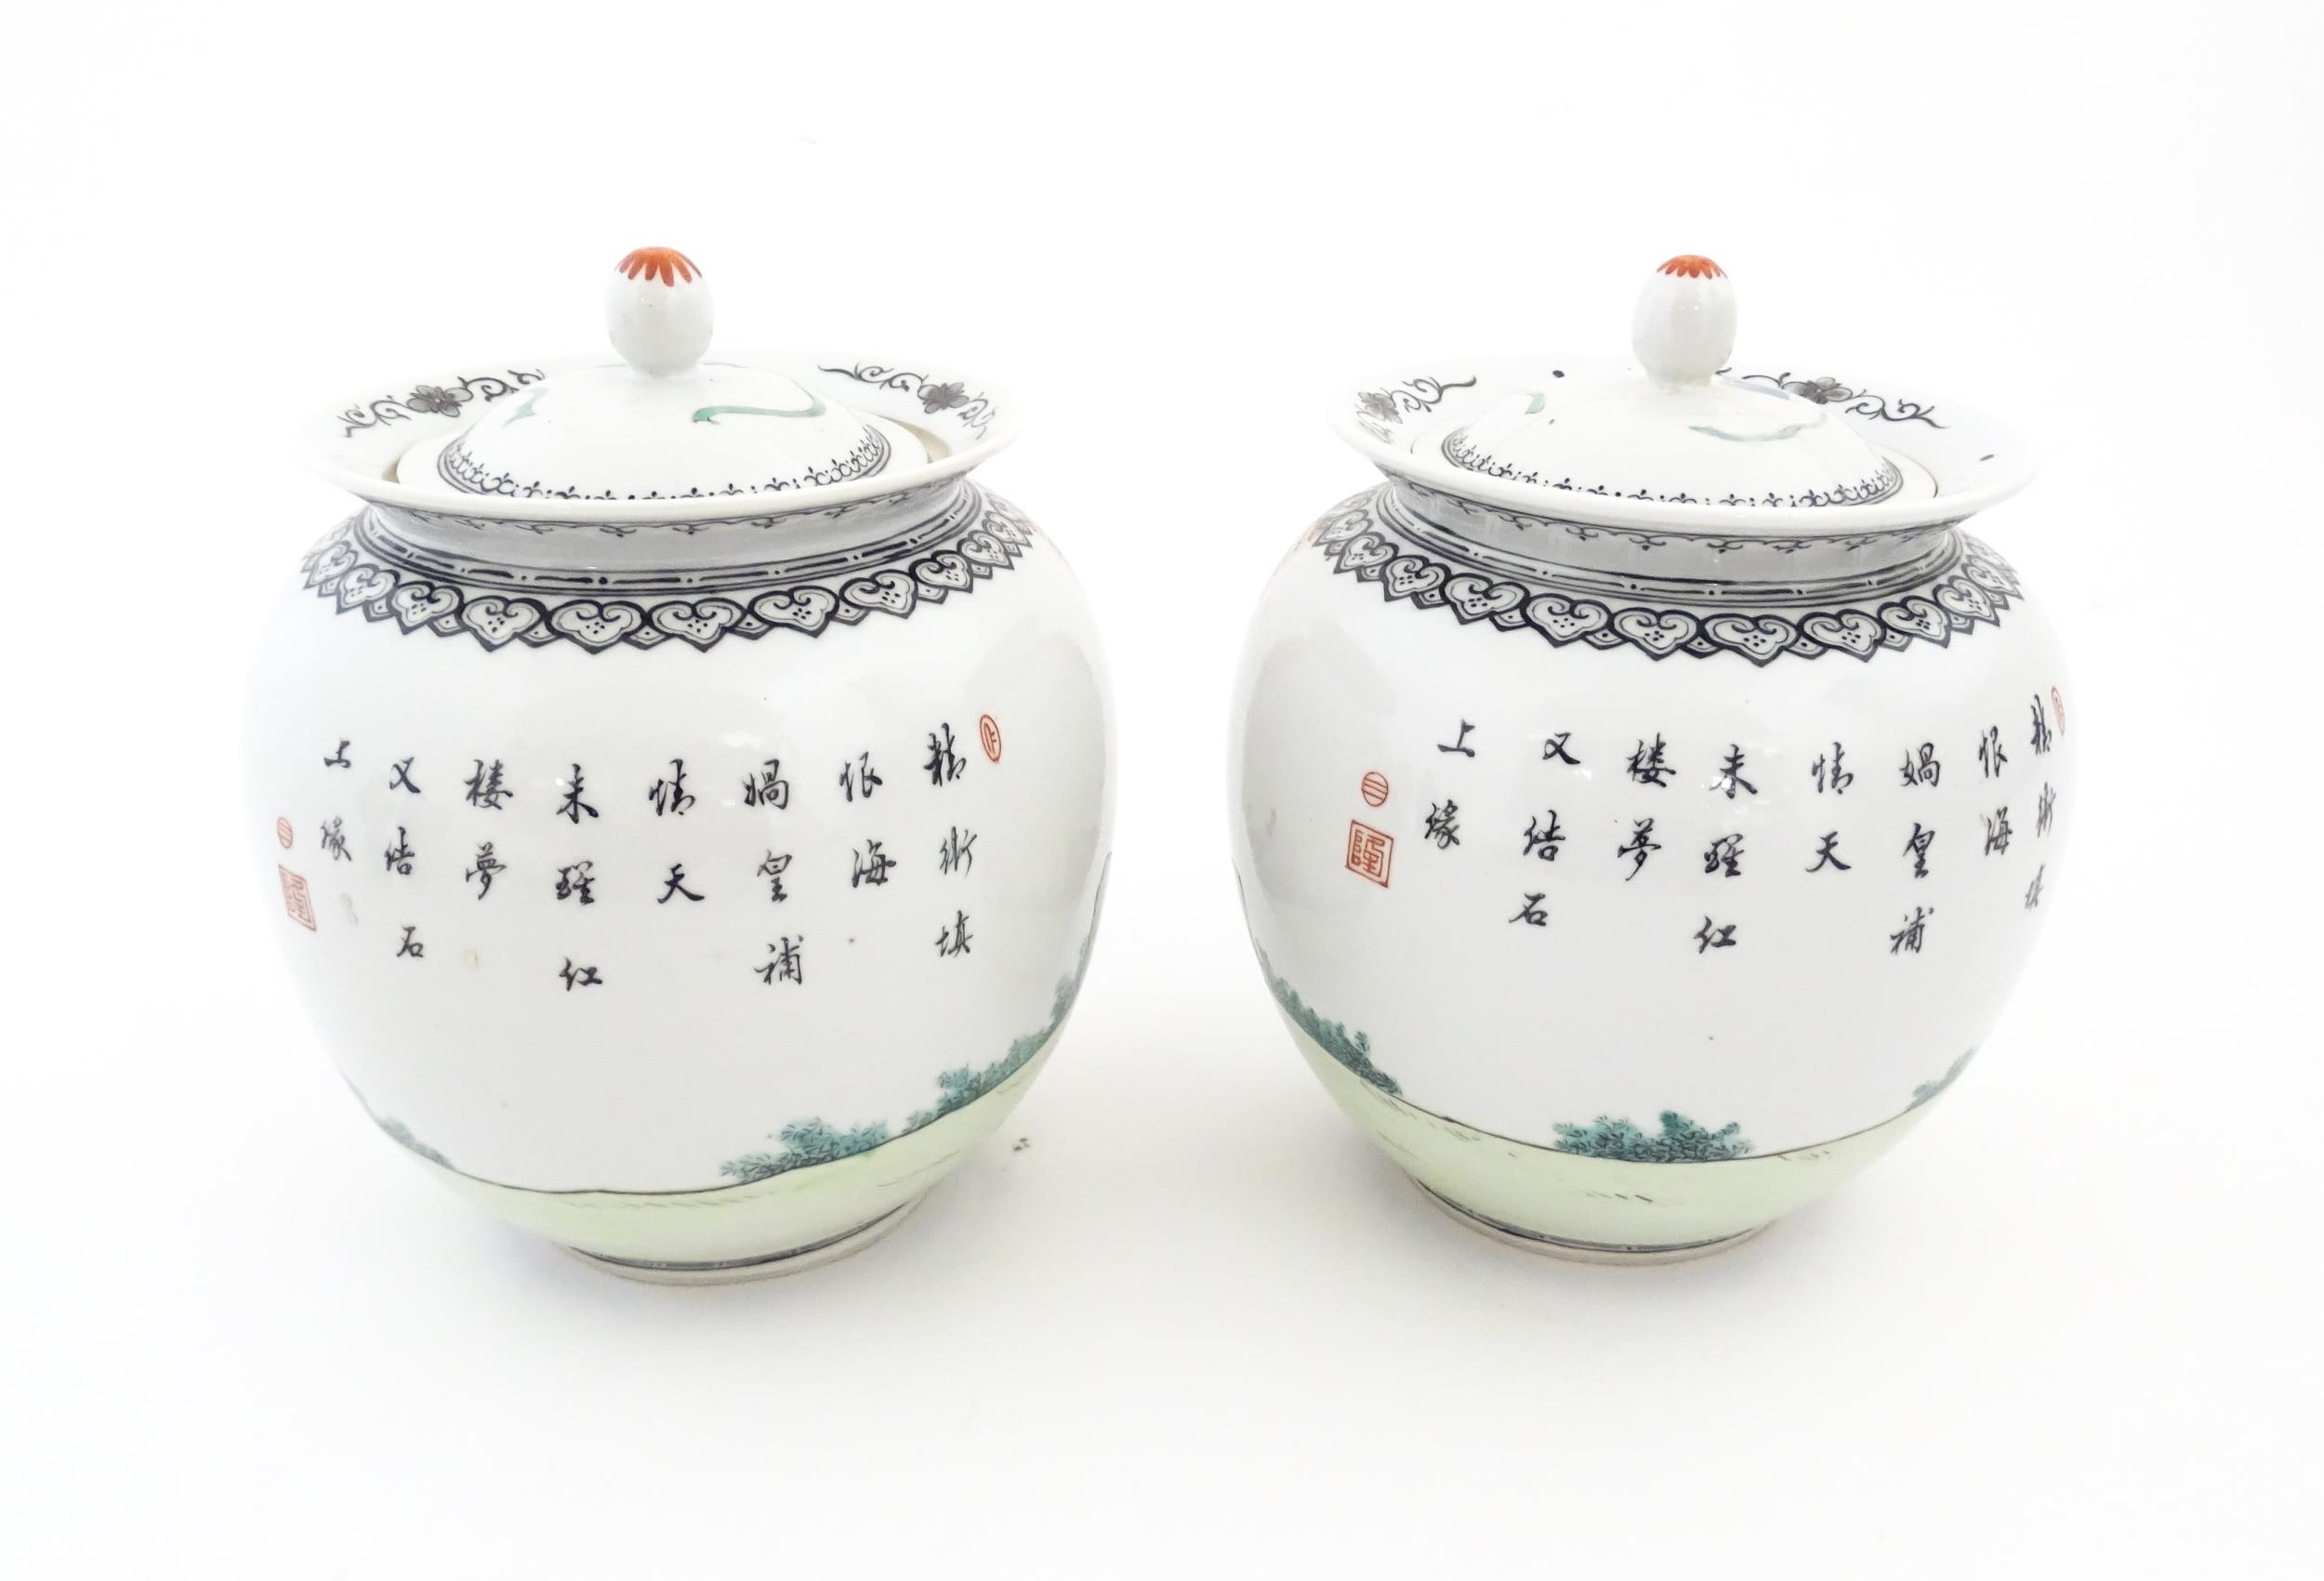 A pair of Chinese pot and cover vases decorated with ladies in a landscapes, and Character script. - Image 6 of 10